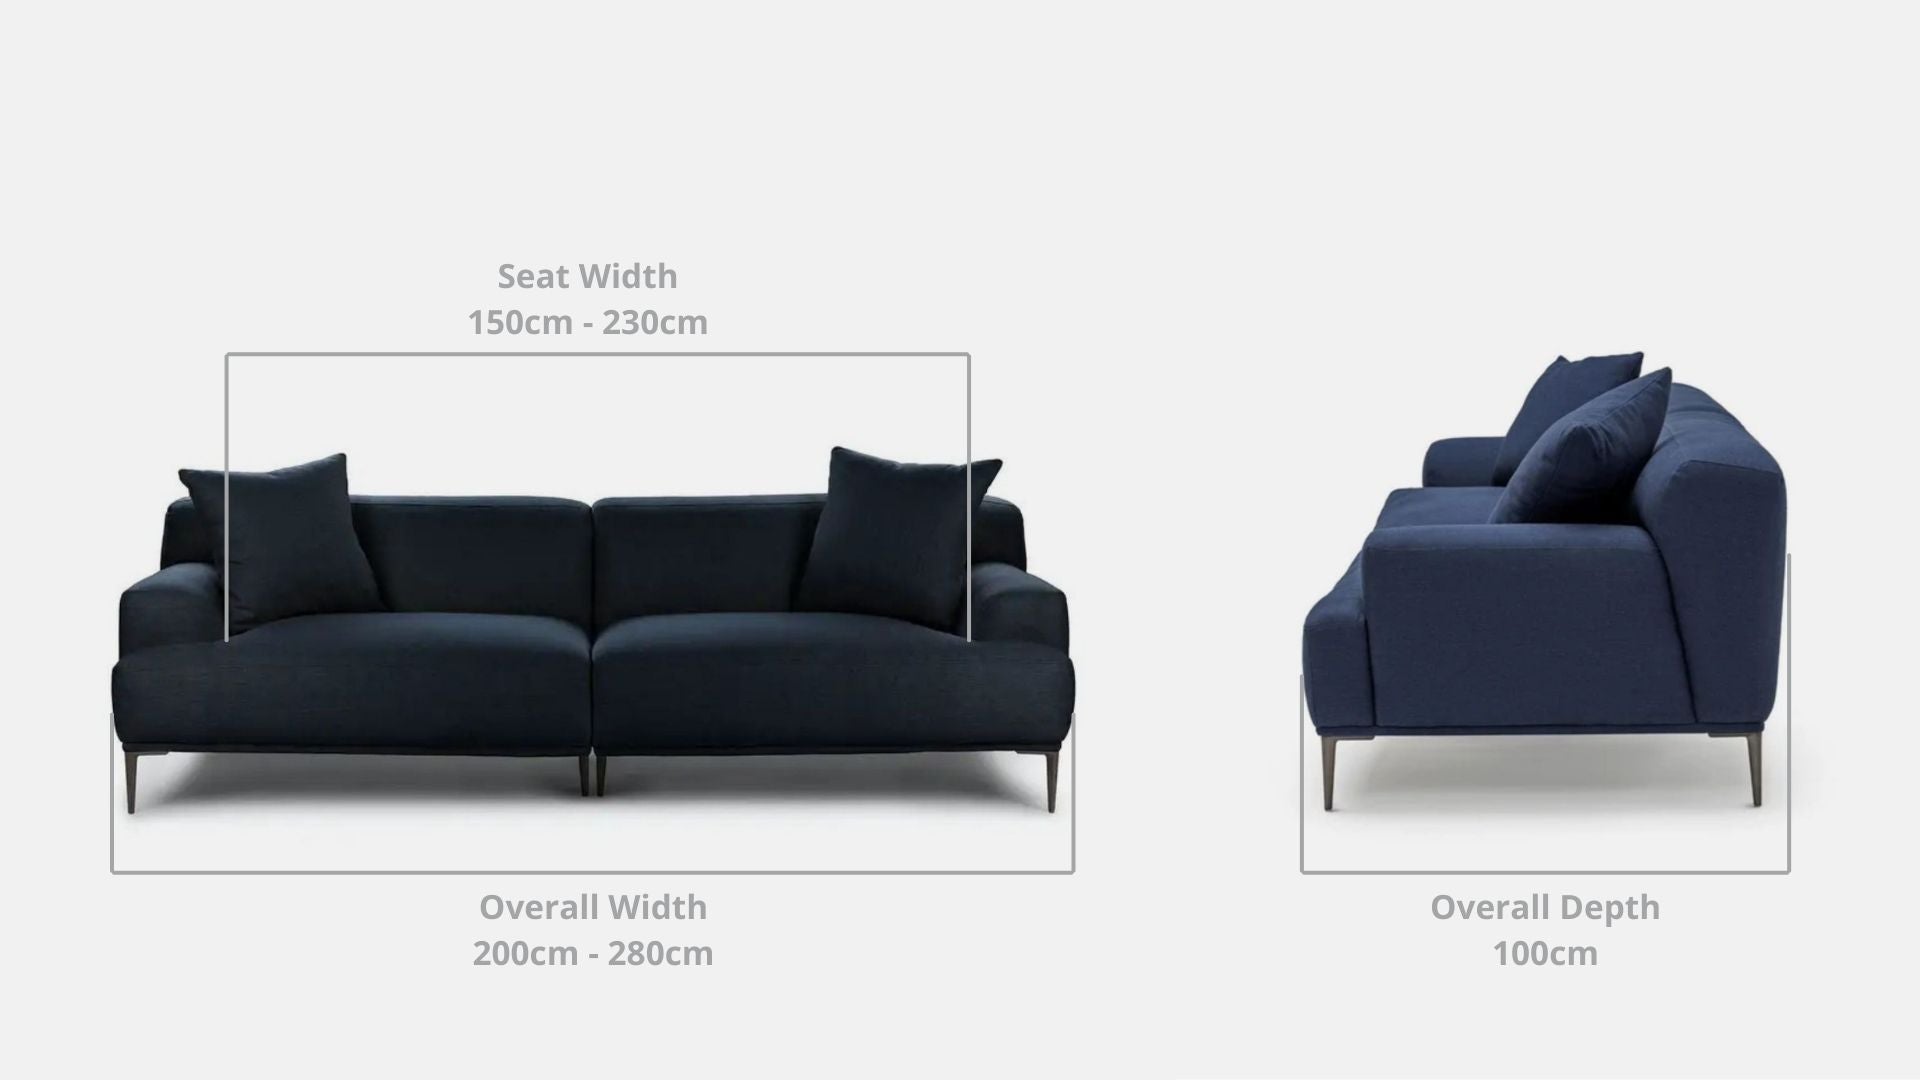 Details the key dimensions in terms of overall width, overall depth and seat width for Crystal Fabric Sofa